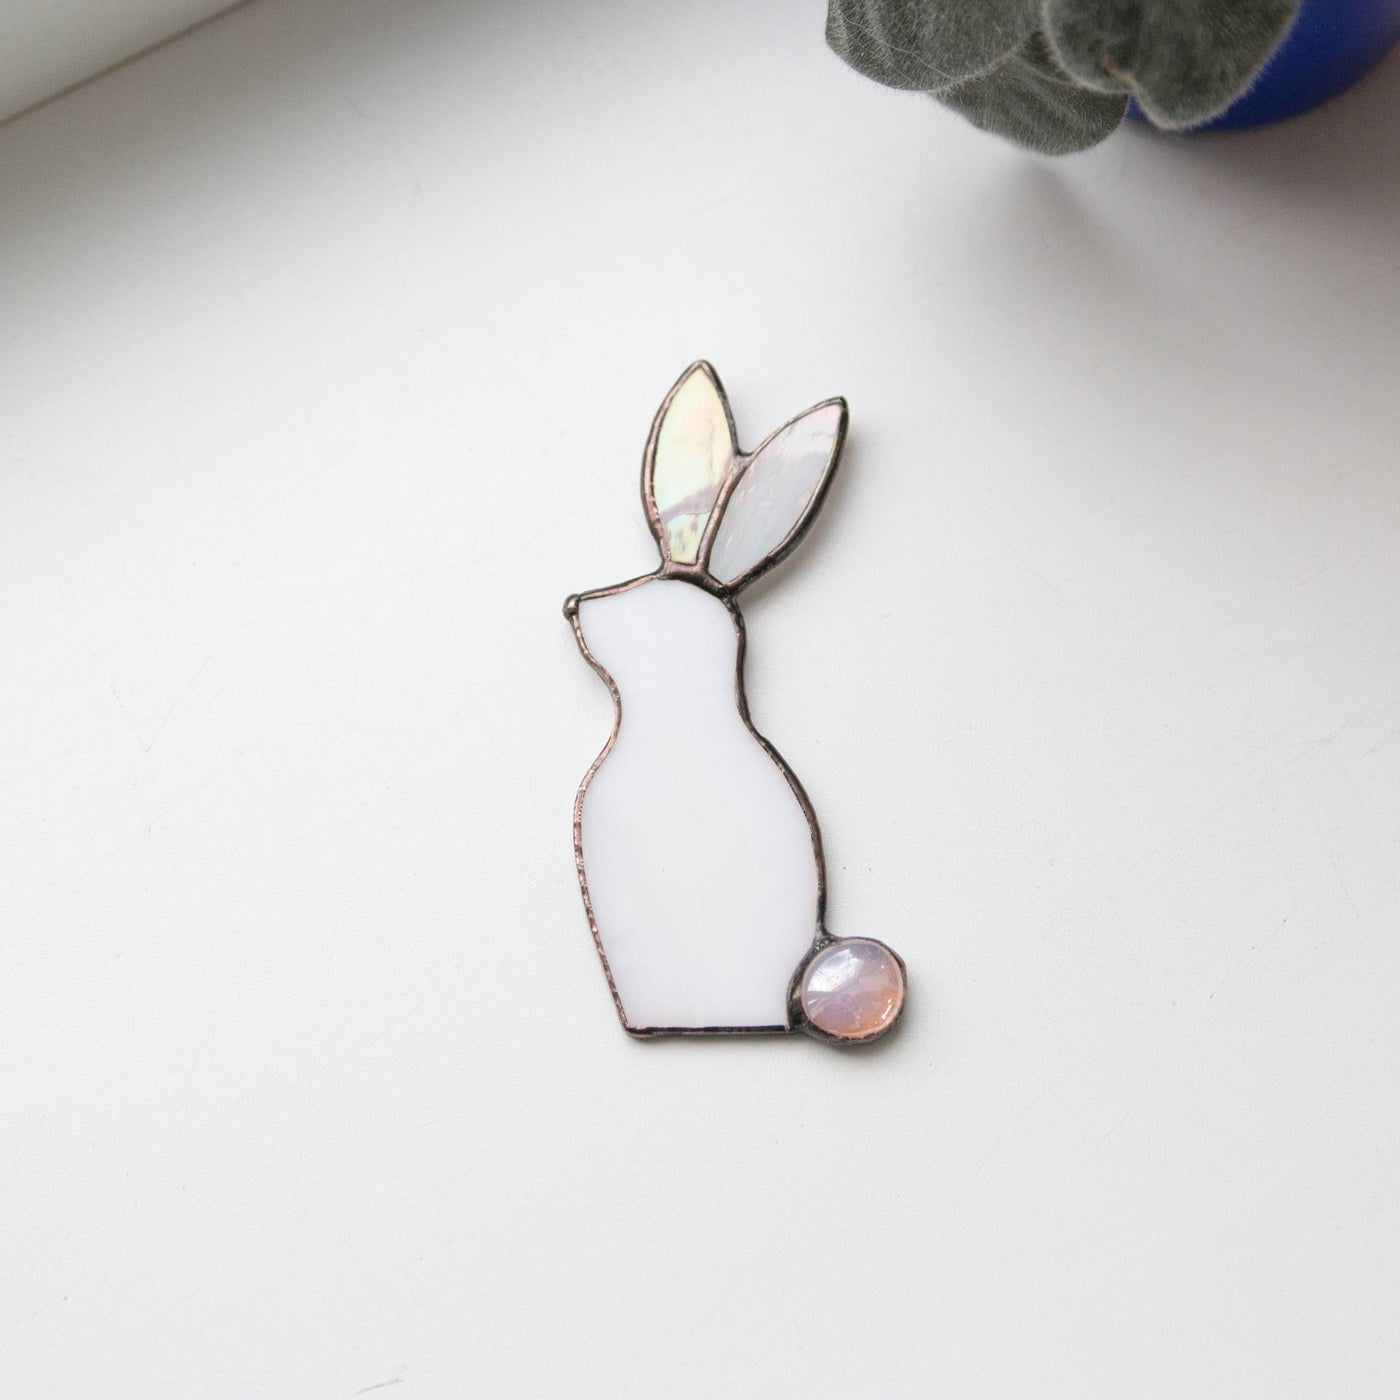 Stained glass white bunny with one pink ear suncatcher for window decor